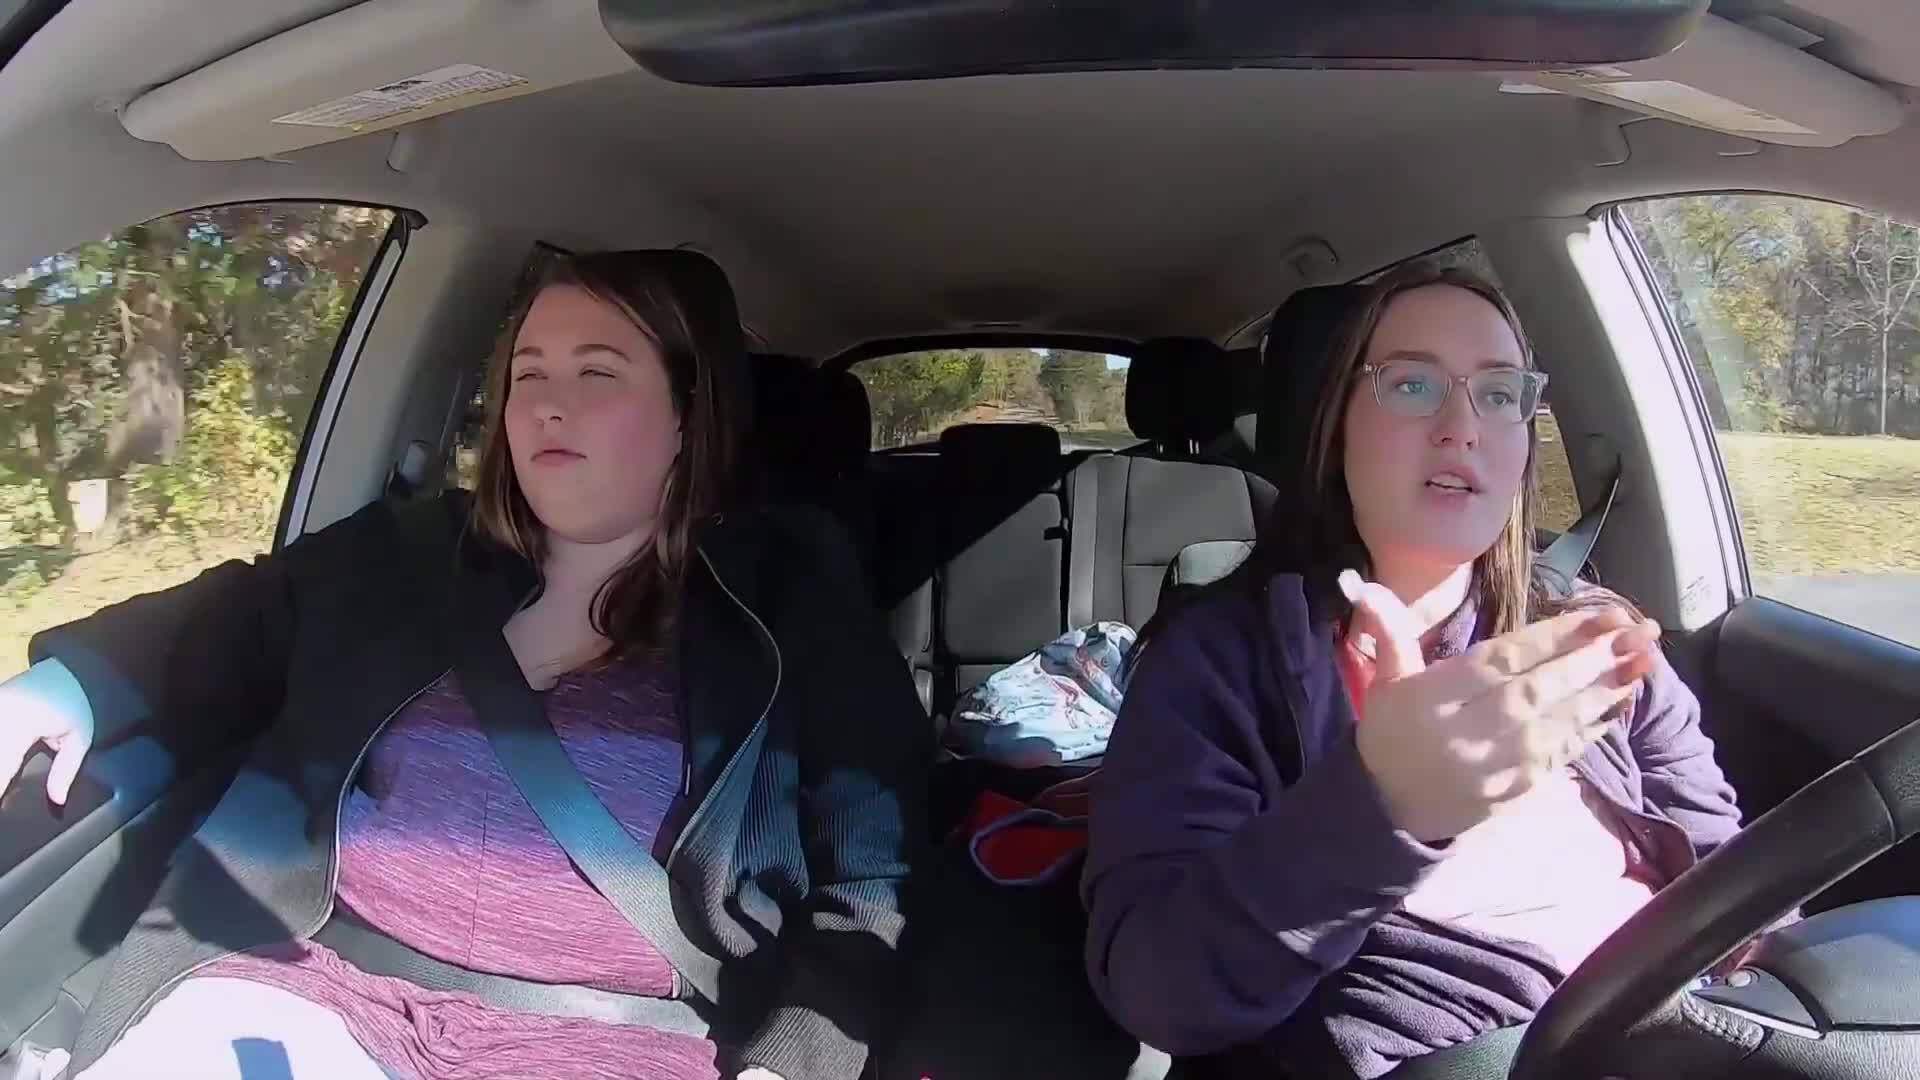 Watch 'She Would Never Move In With You!' | Mama June: From Not to Hot Video Extras